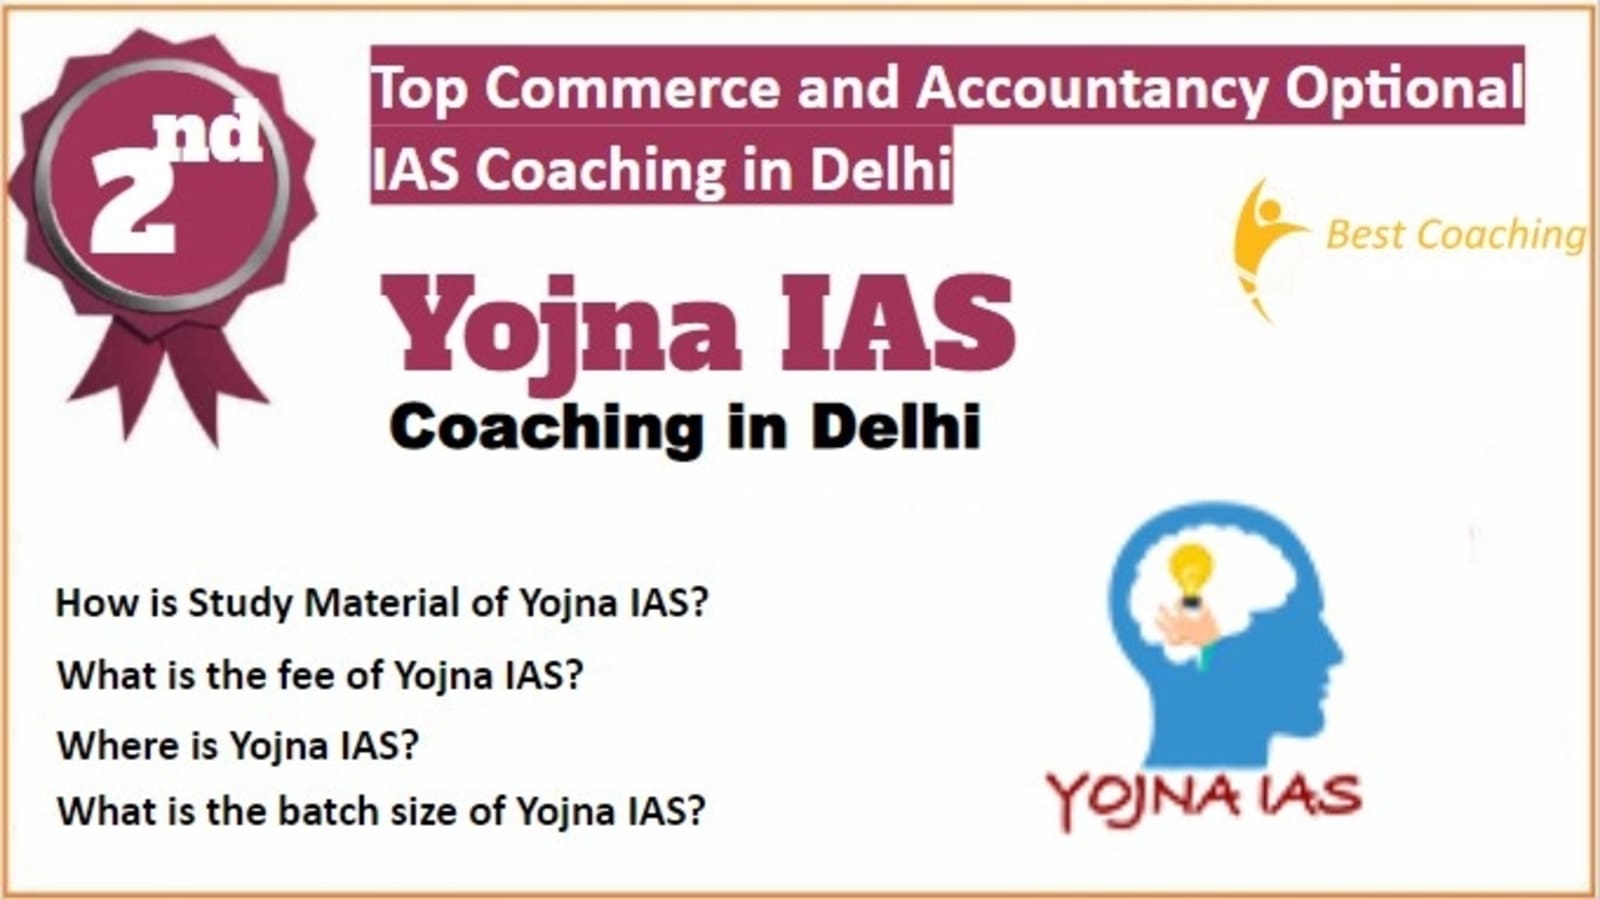 Rank 2 Best Commerce and Accountancy Optional IAS Coaching in Delhi